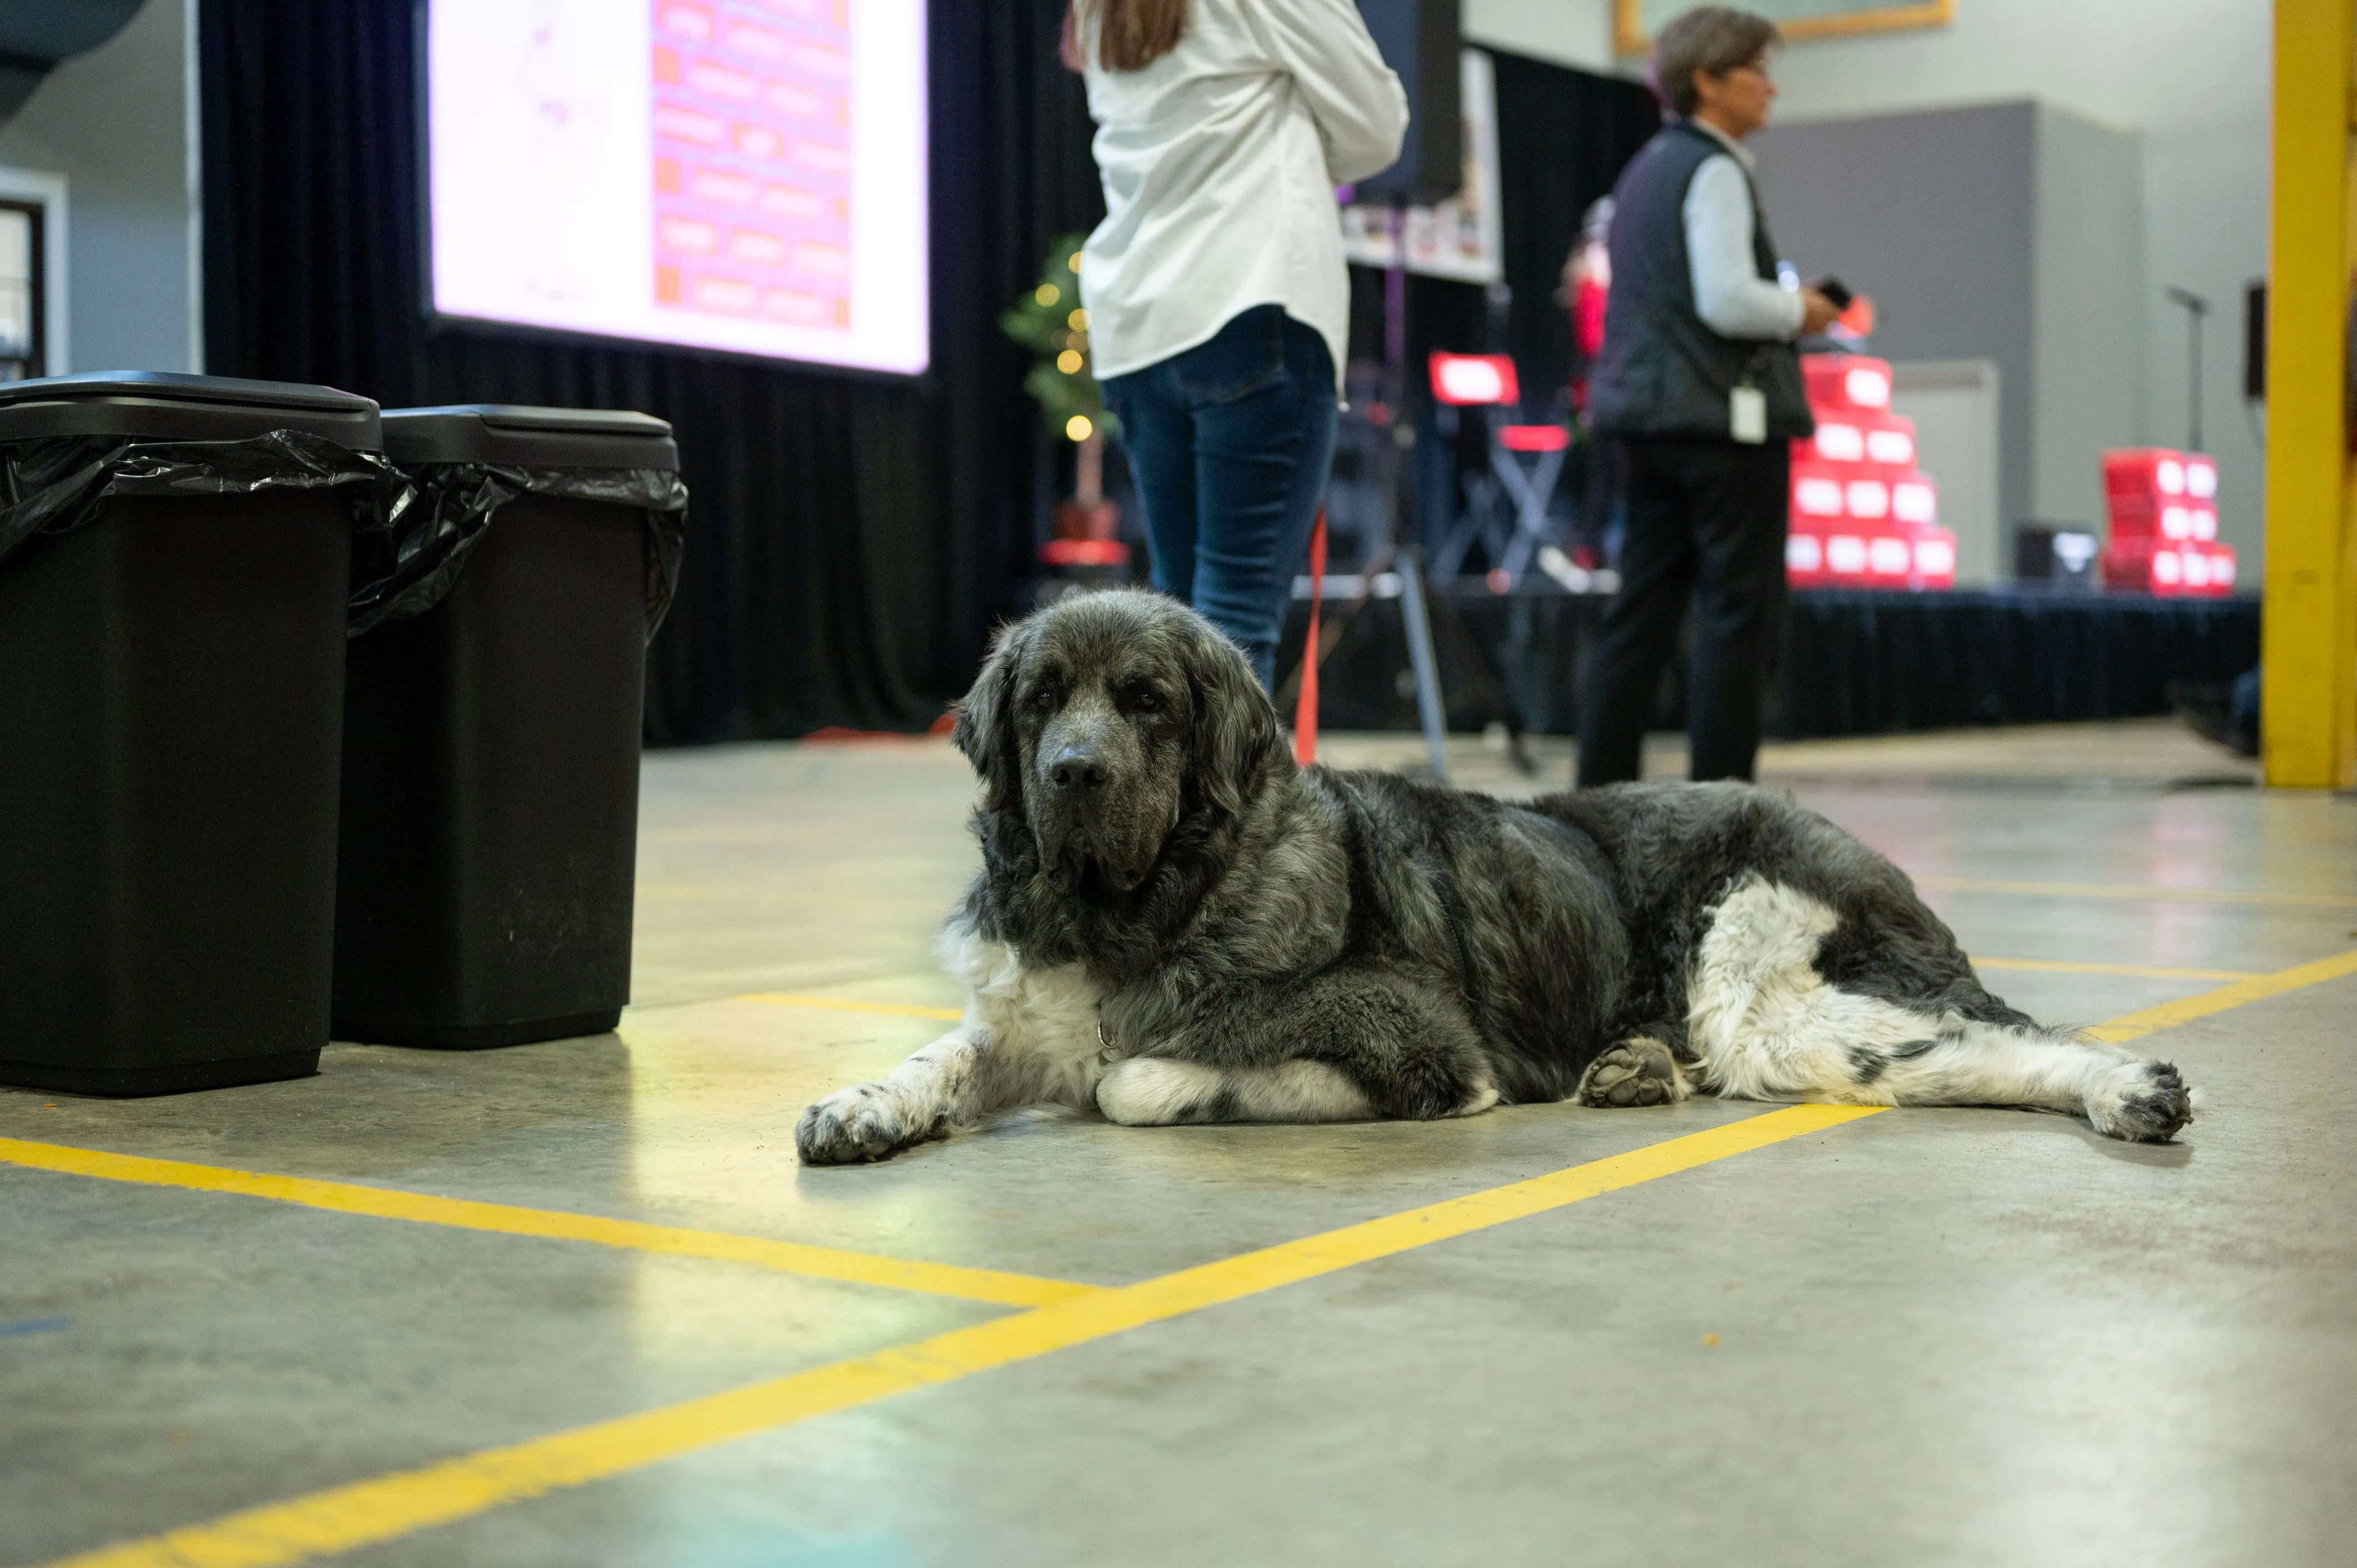 Dog lying on the floor at an indoor event with people and exhibition stands in the background.